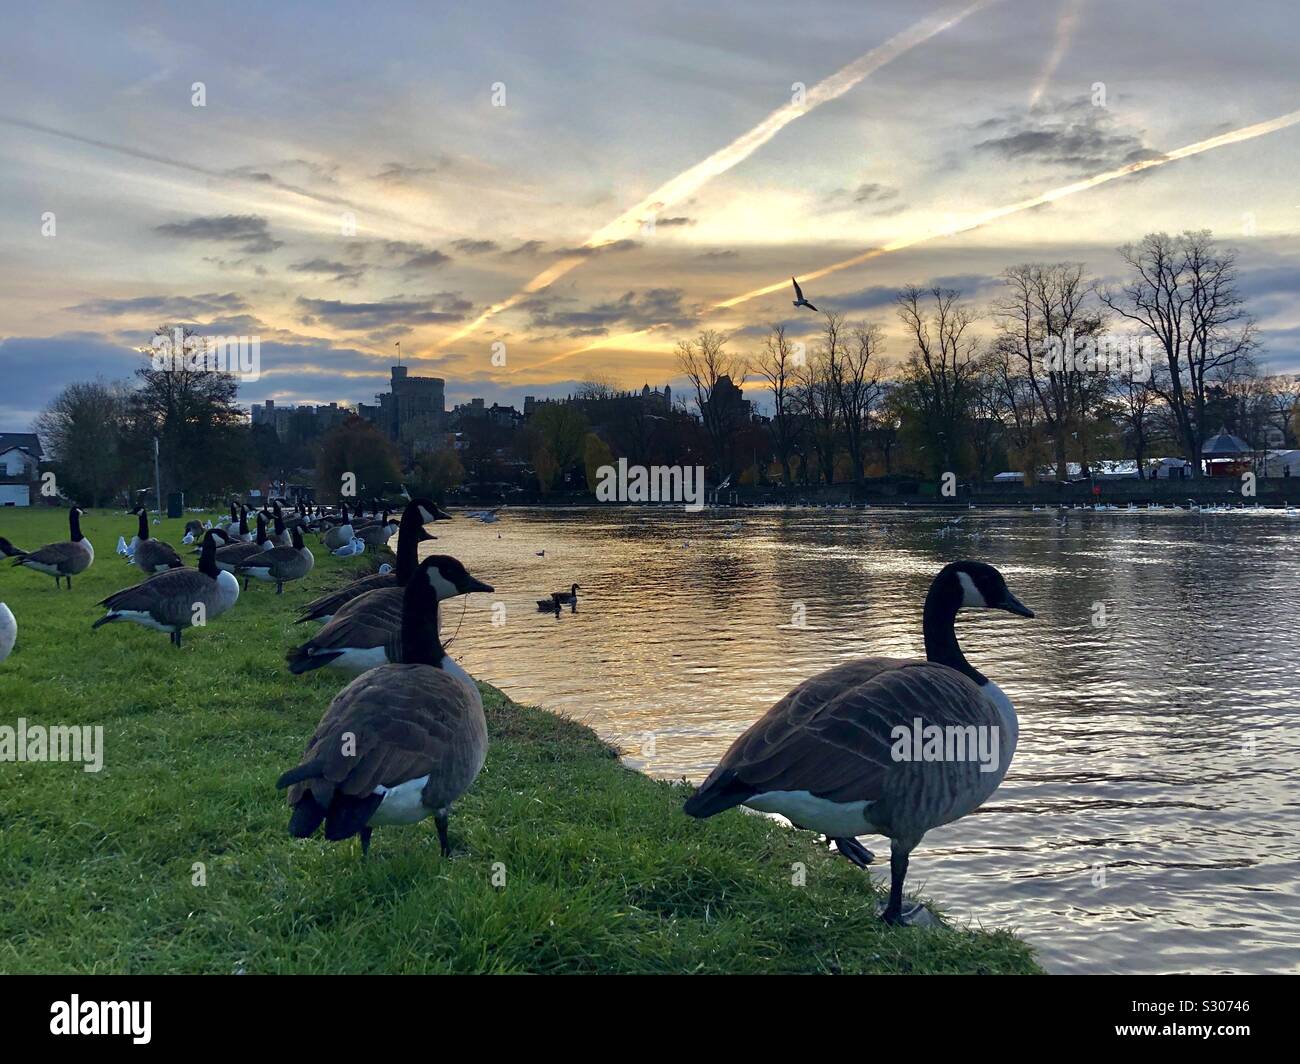 Canada geese wait by the Thames river in front of Windsor castle as seagulls take to the air and airplane contrails cross the sky in the early morning sunset. Stock Photo